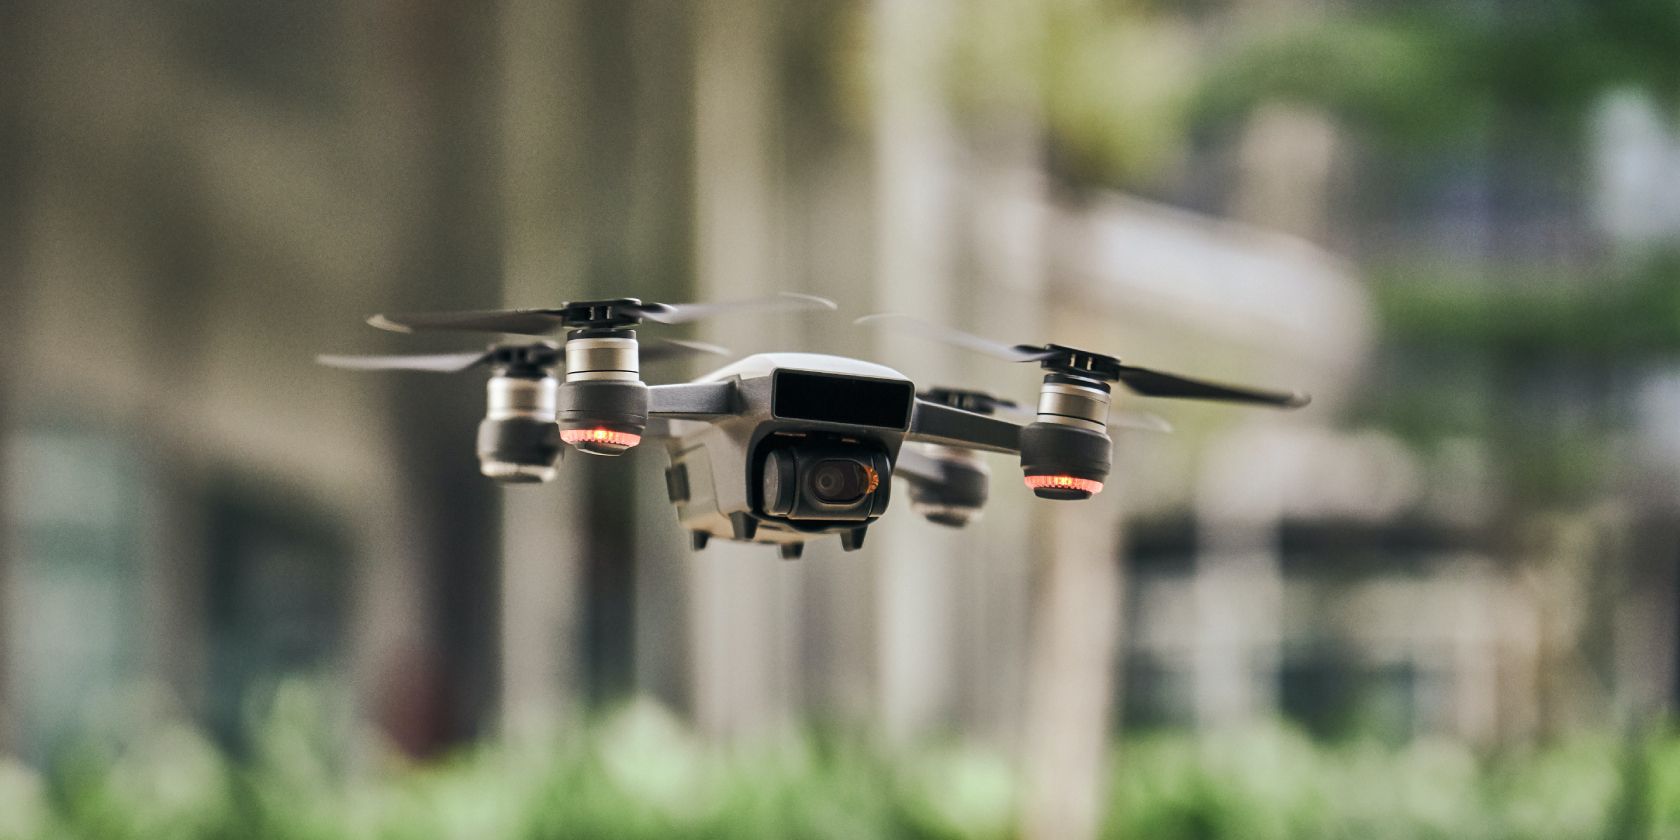 White quadcopter drone flying against a blurred background